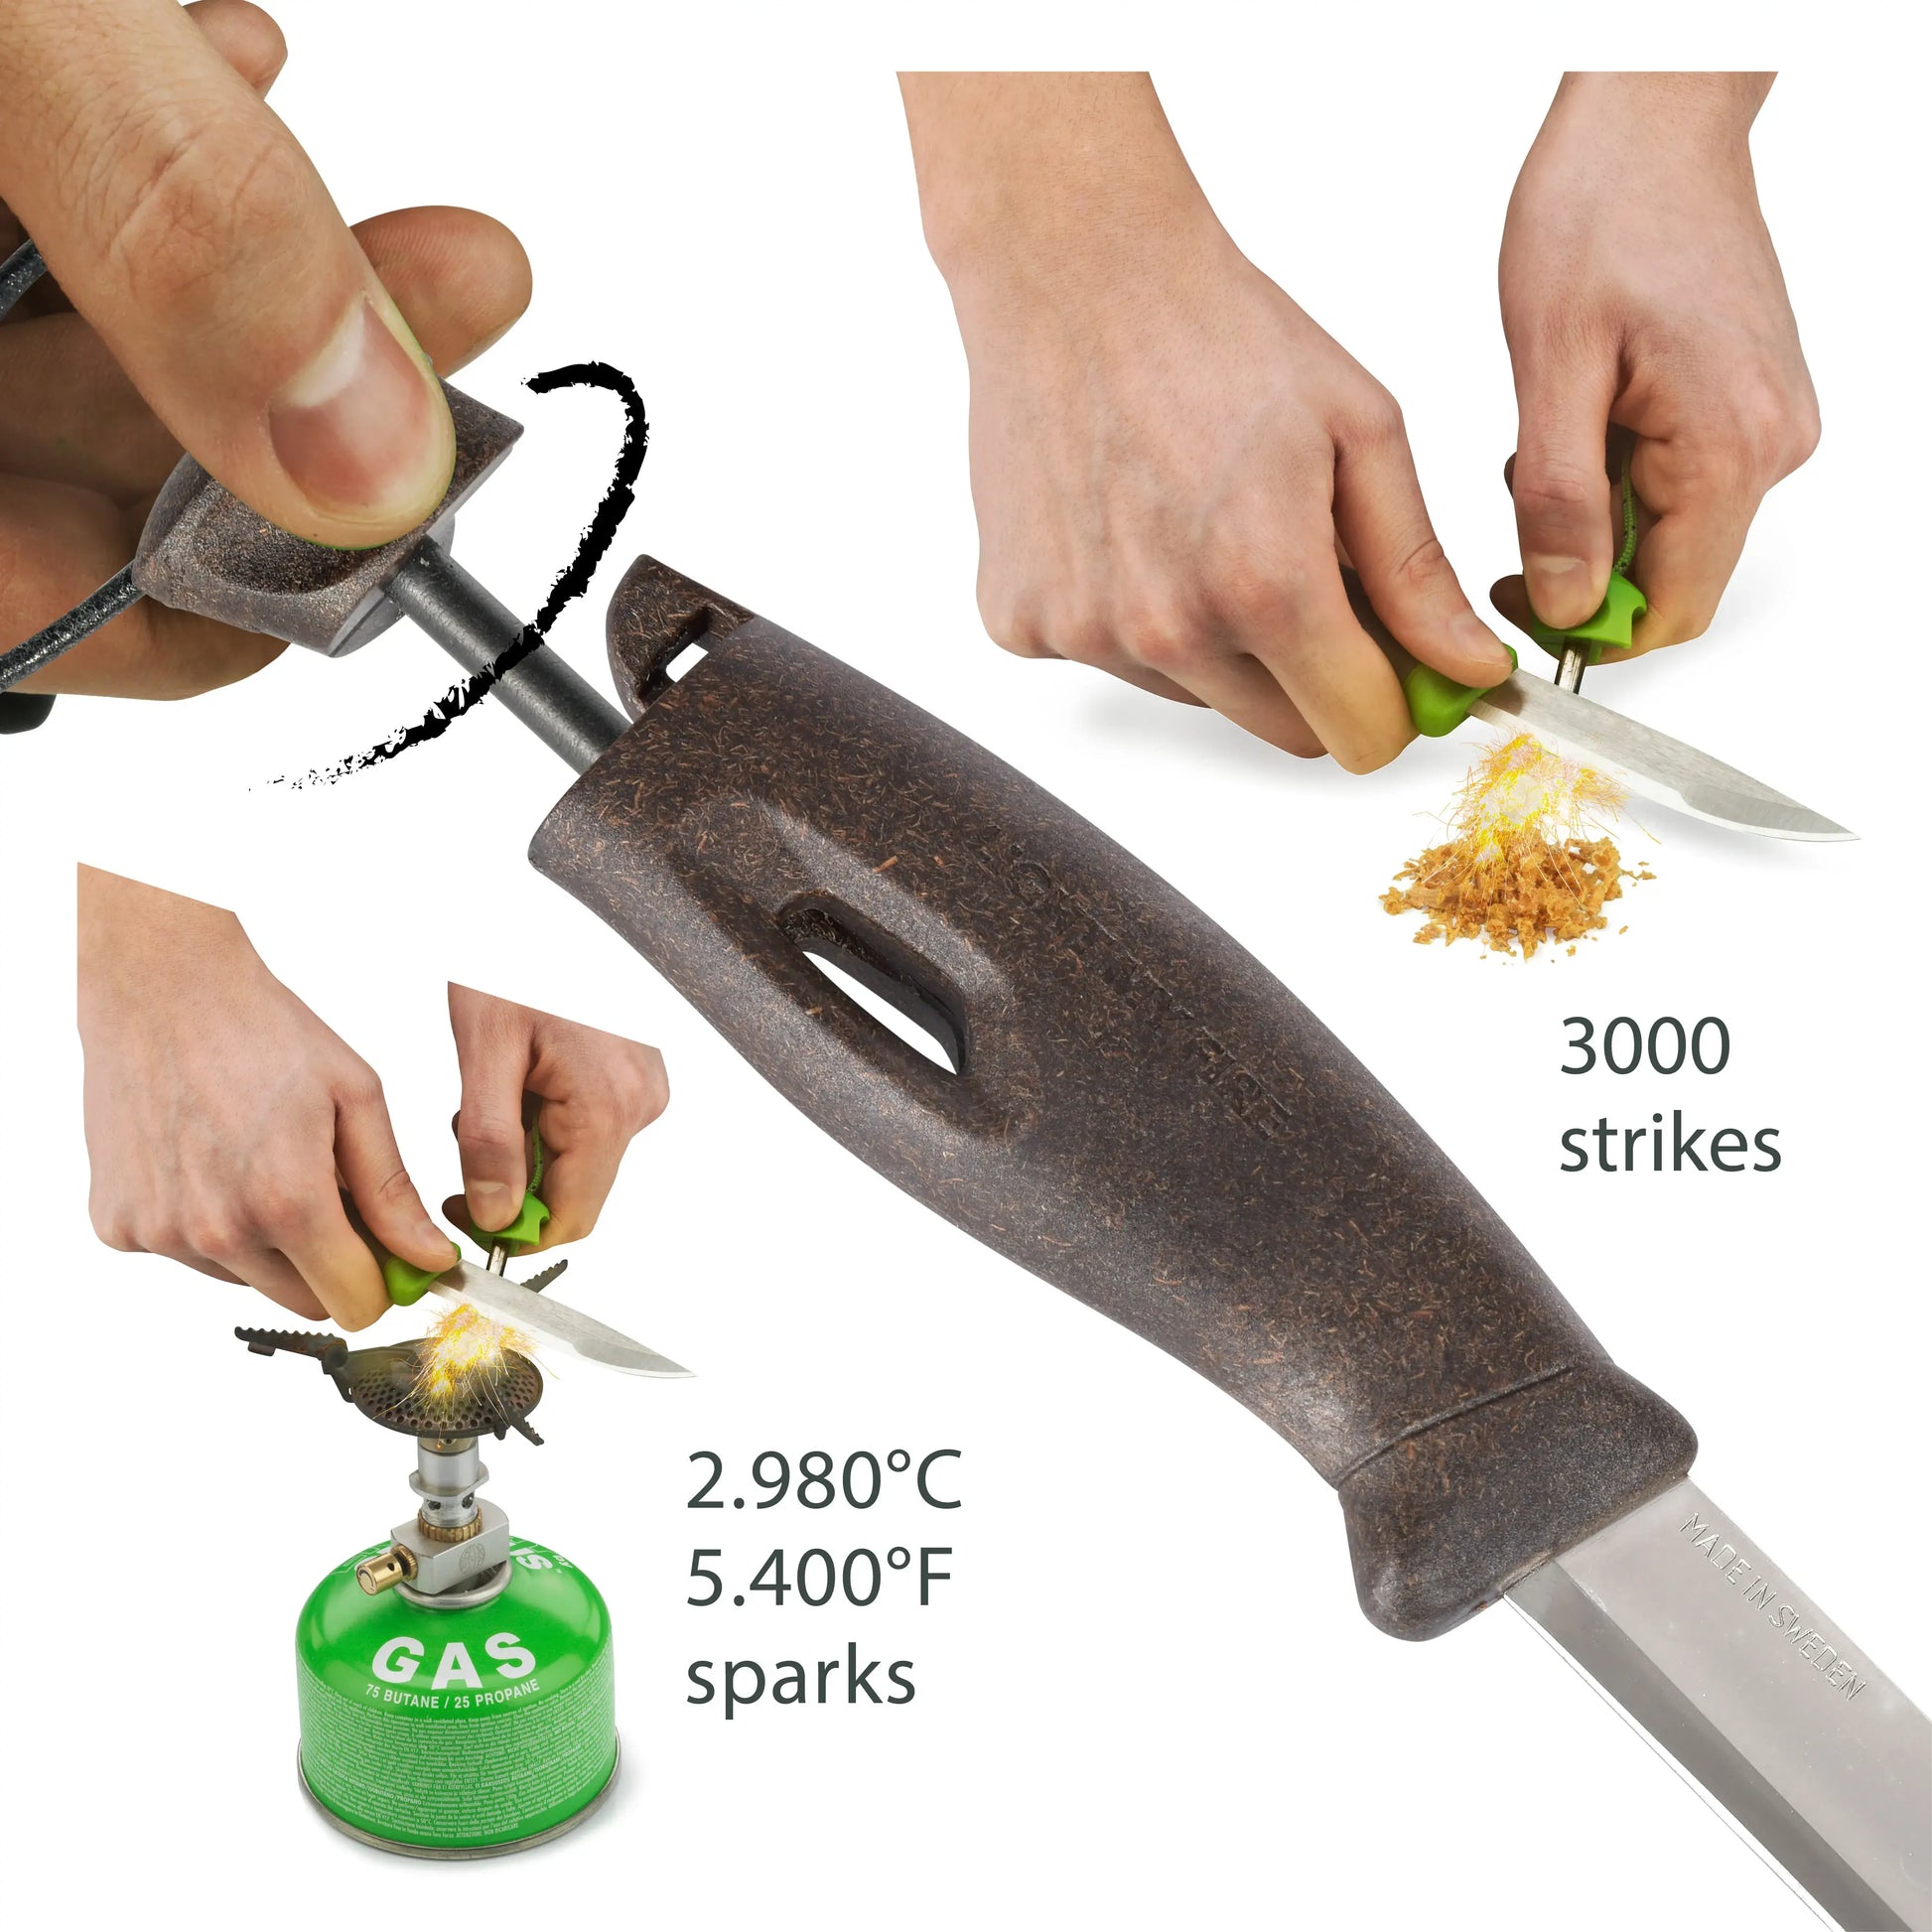 Steps for making sparks with a knife and ferro rod.